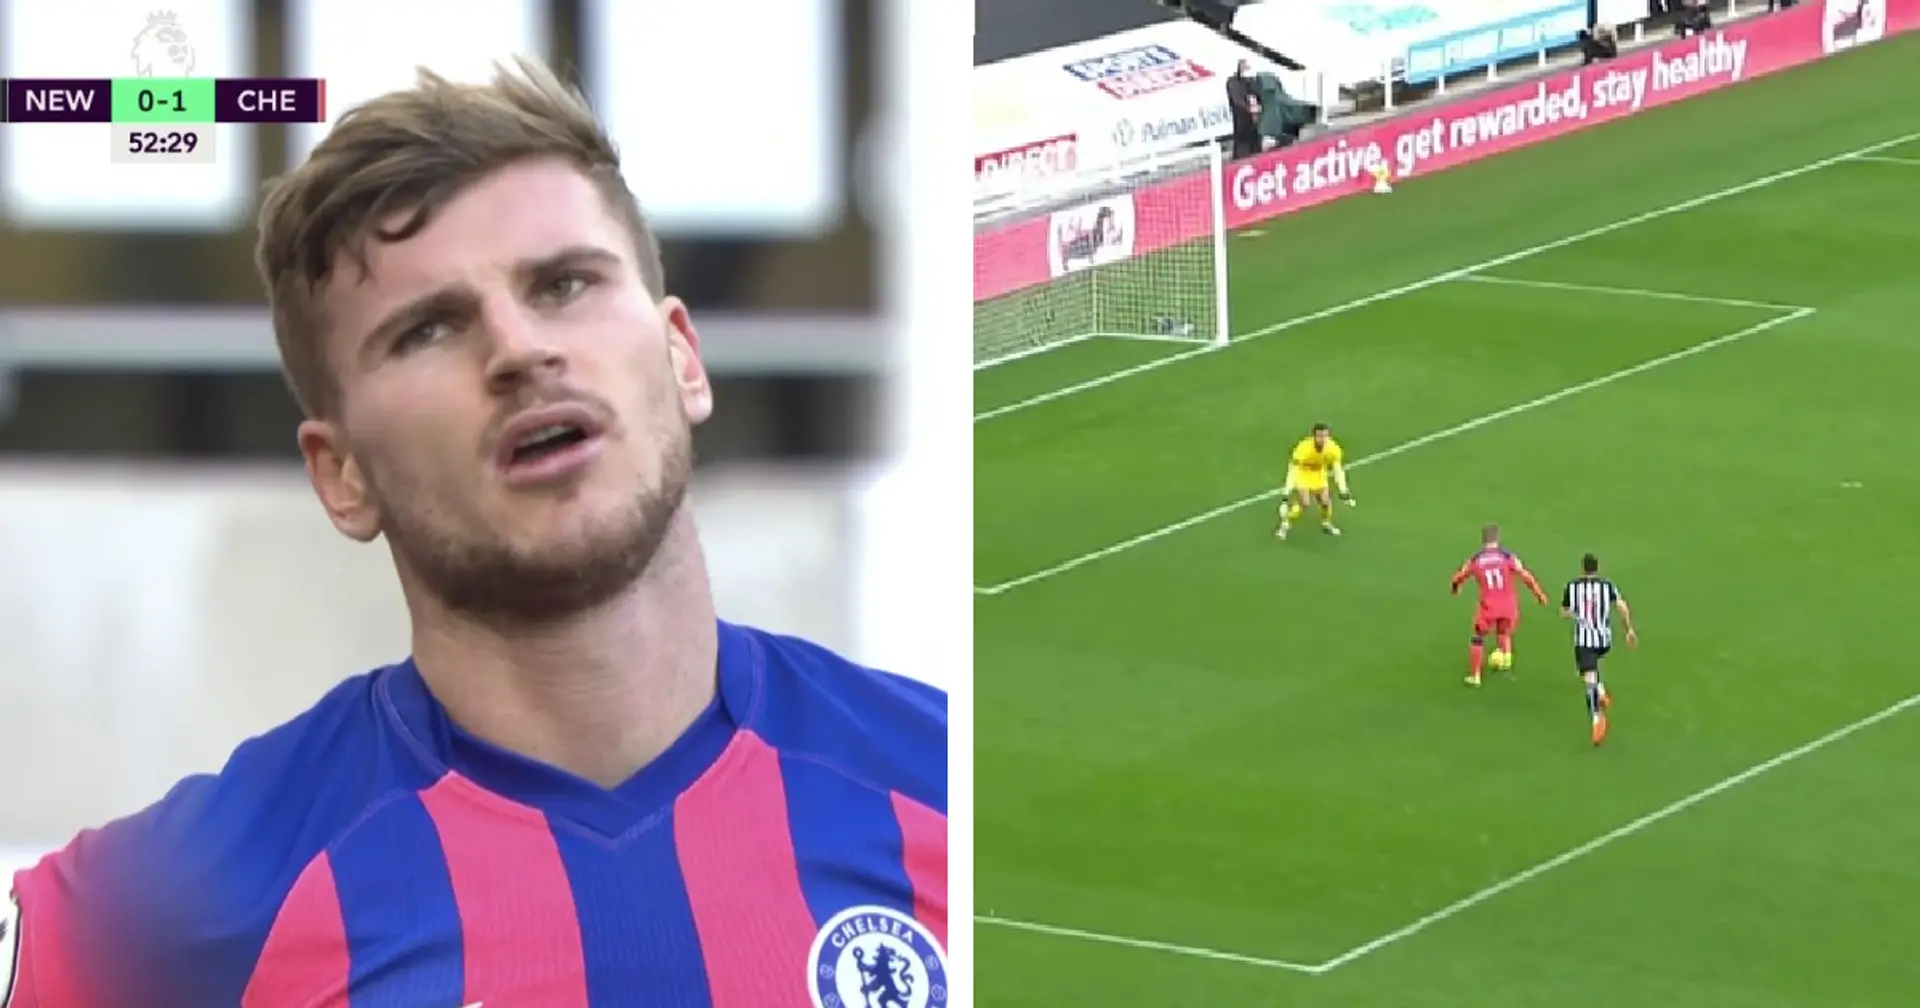 Just shoot!: Werner wastes great chance after winning the ball back brilliantly